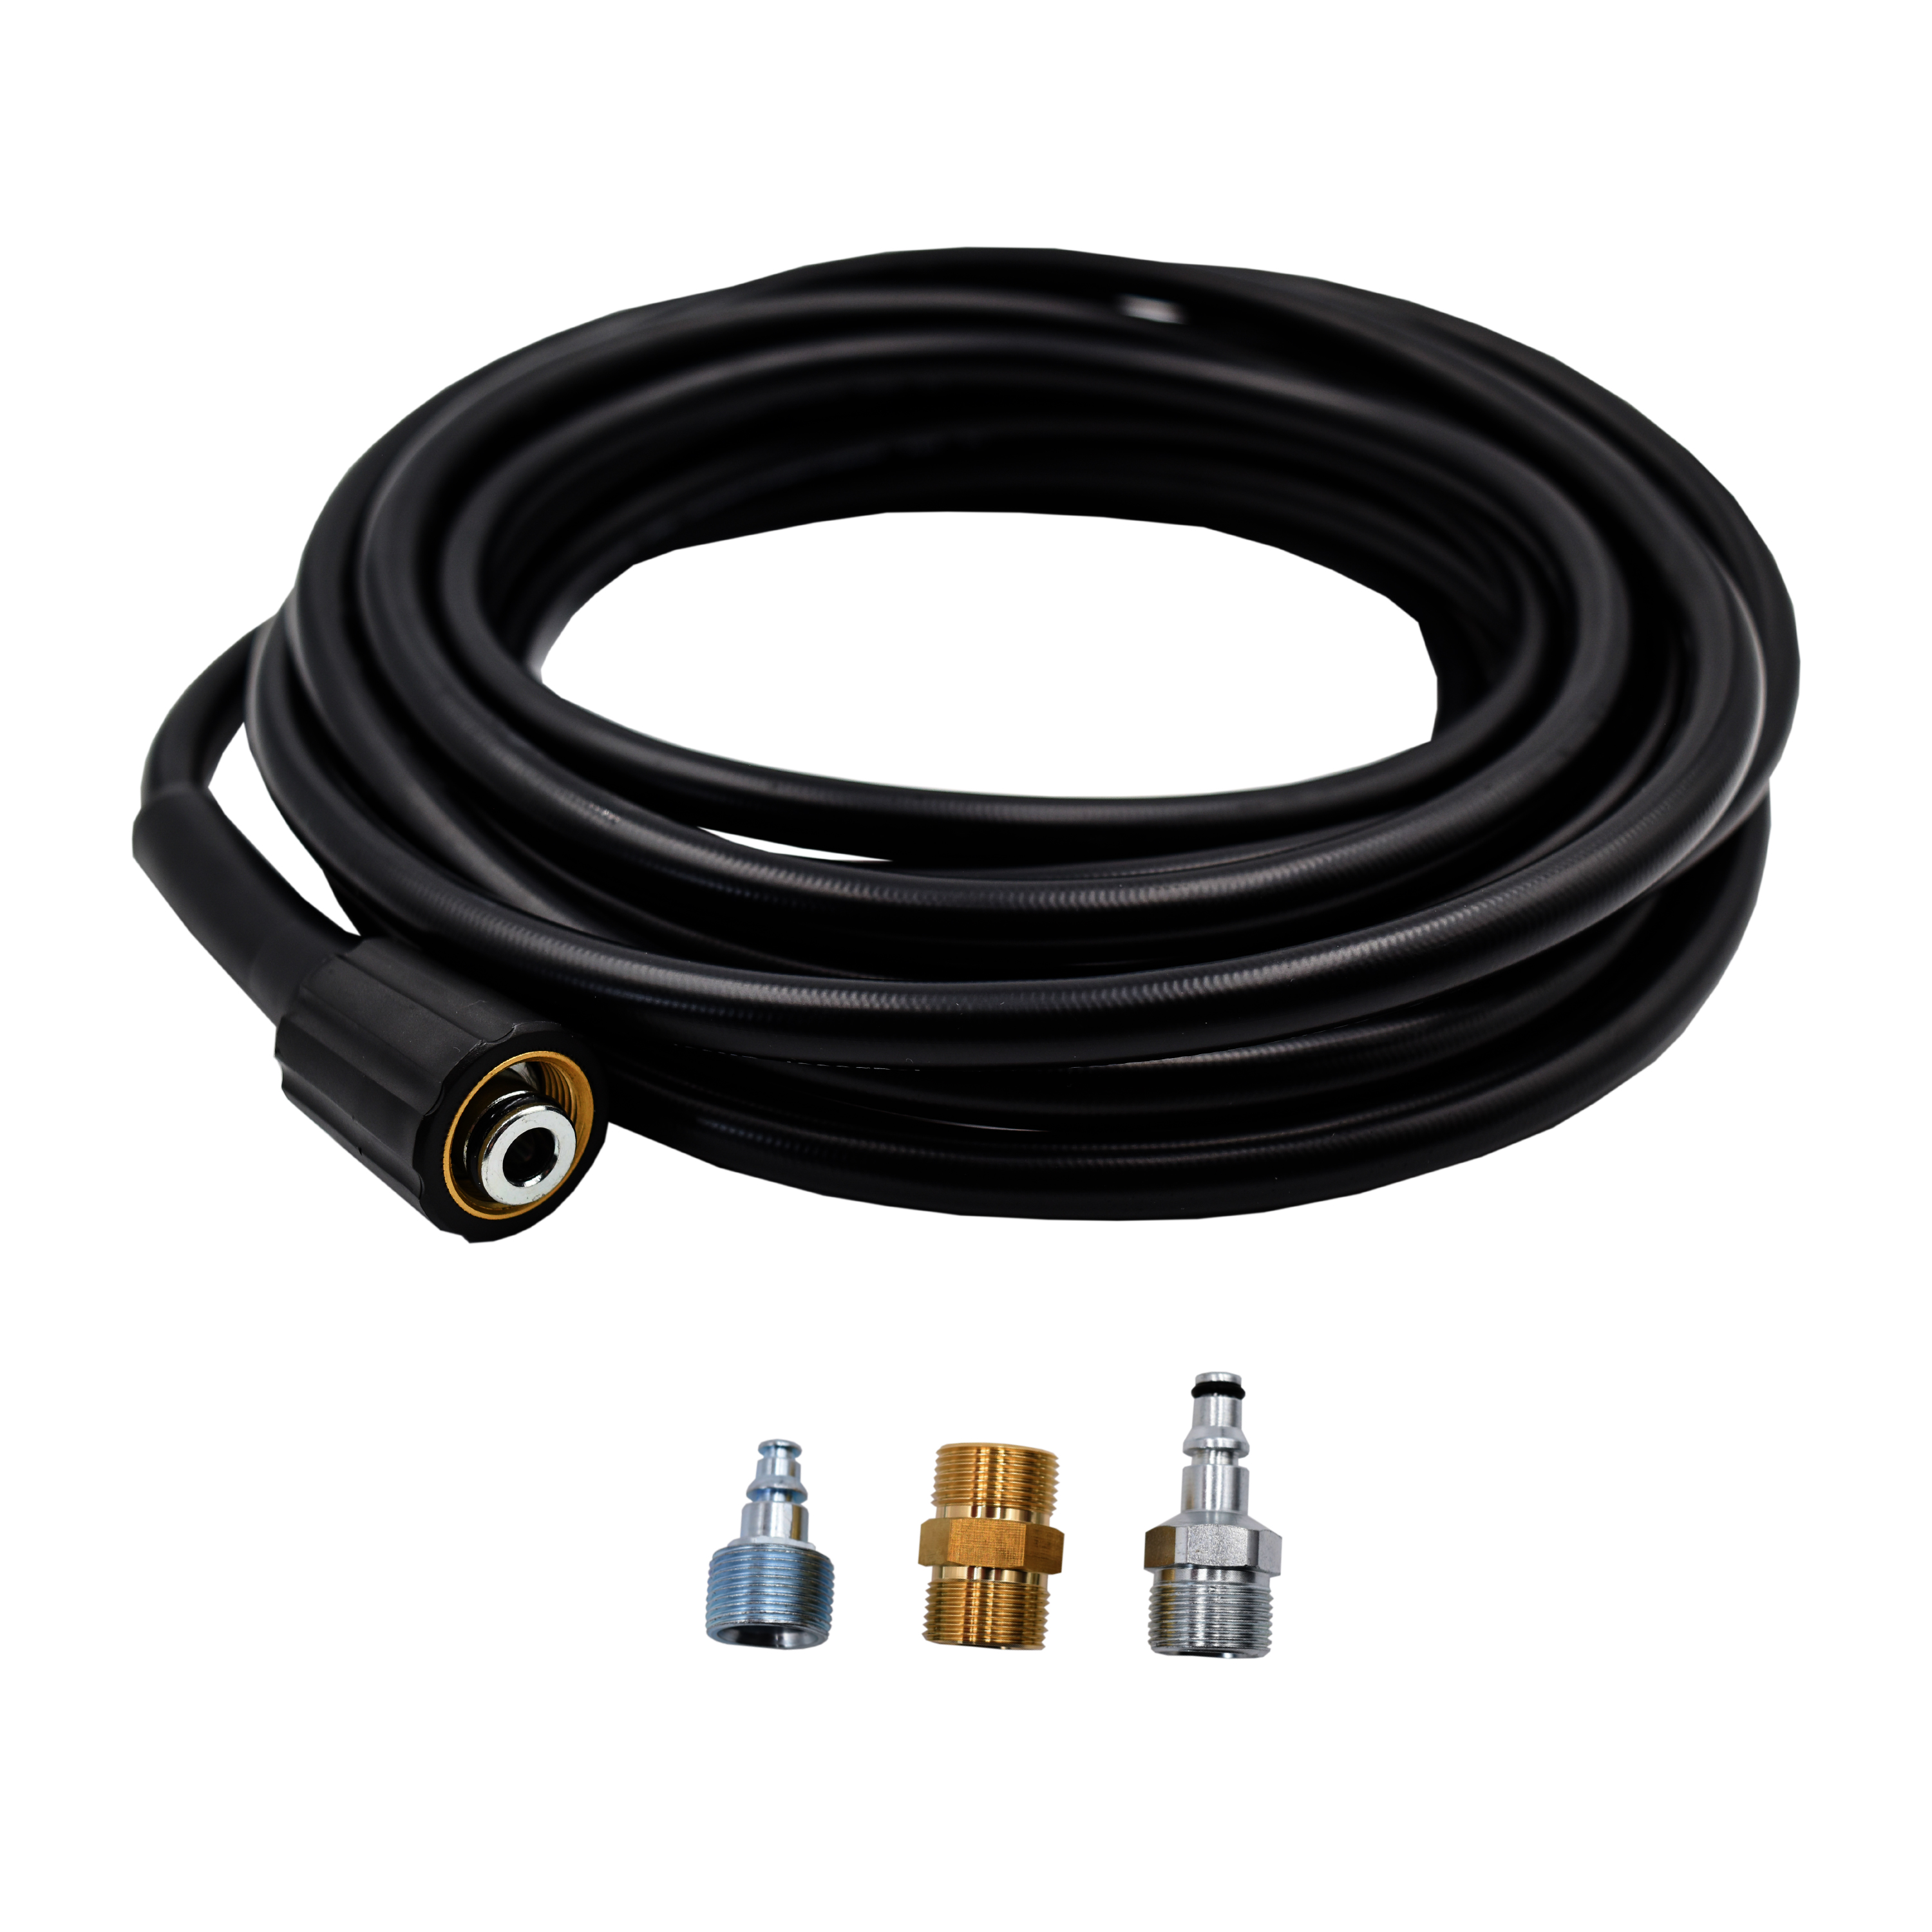 Is this hose compatible with Model AR383?